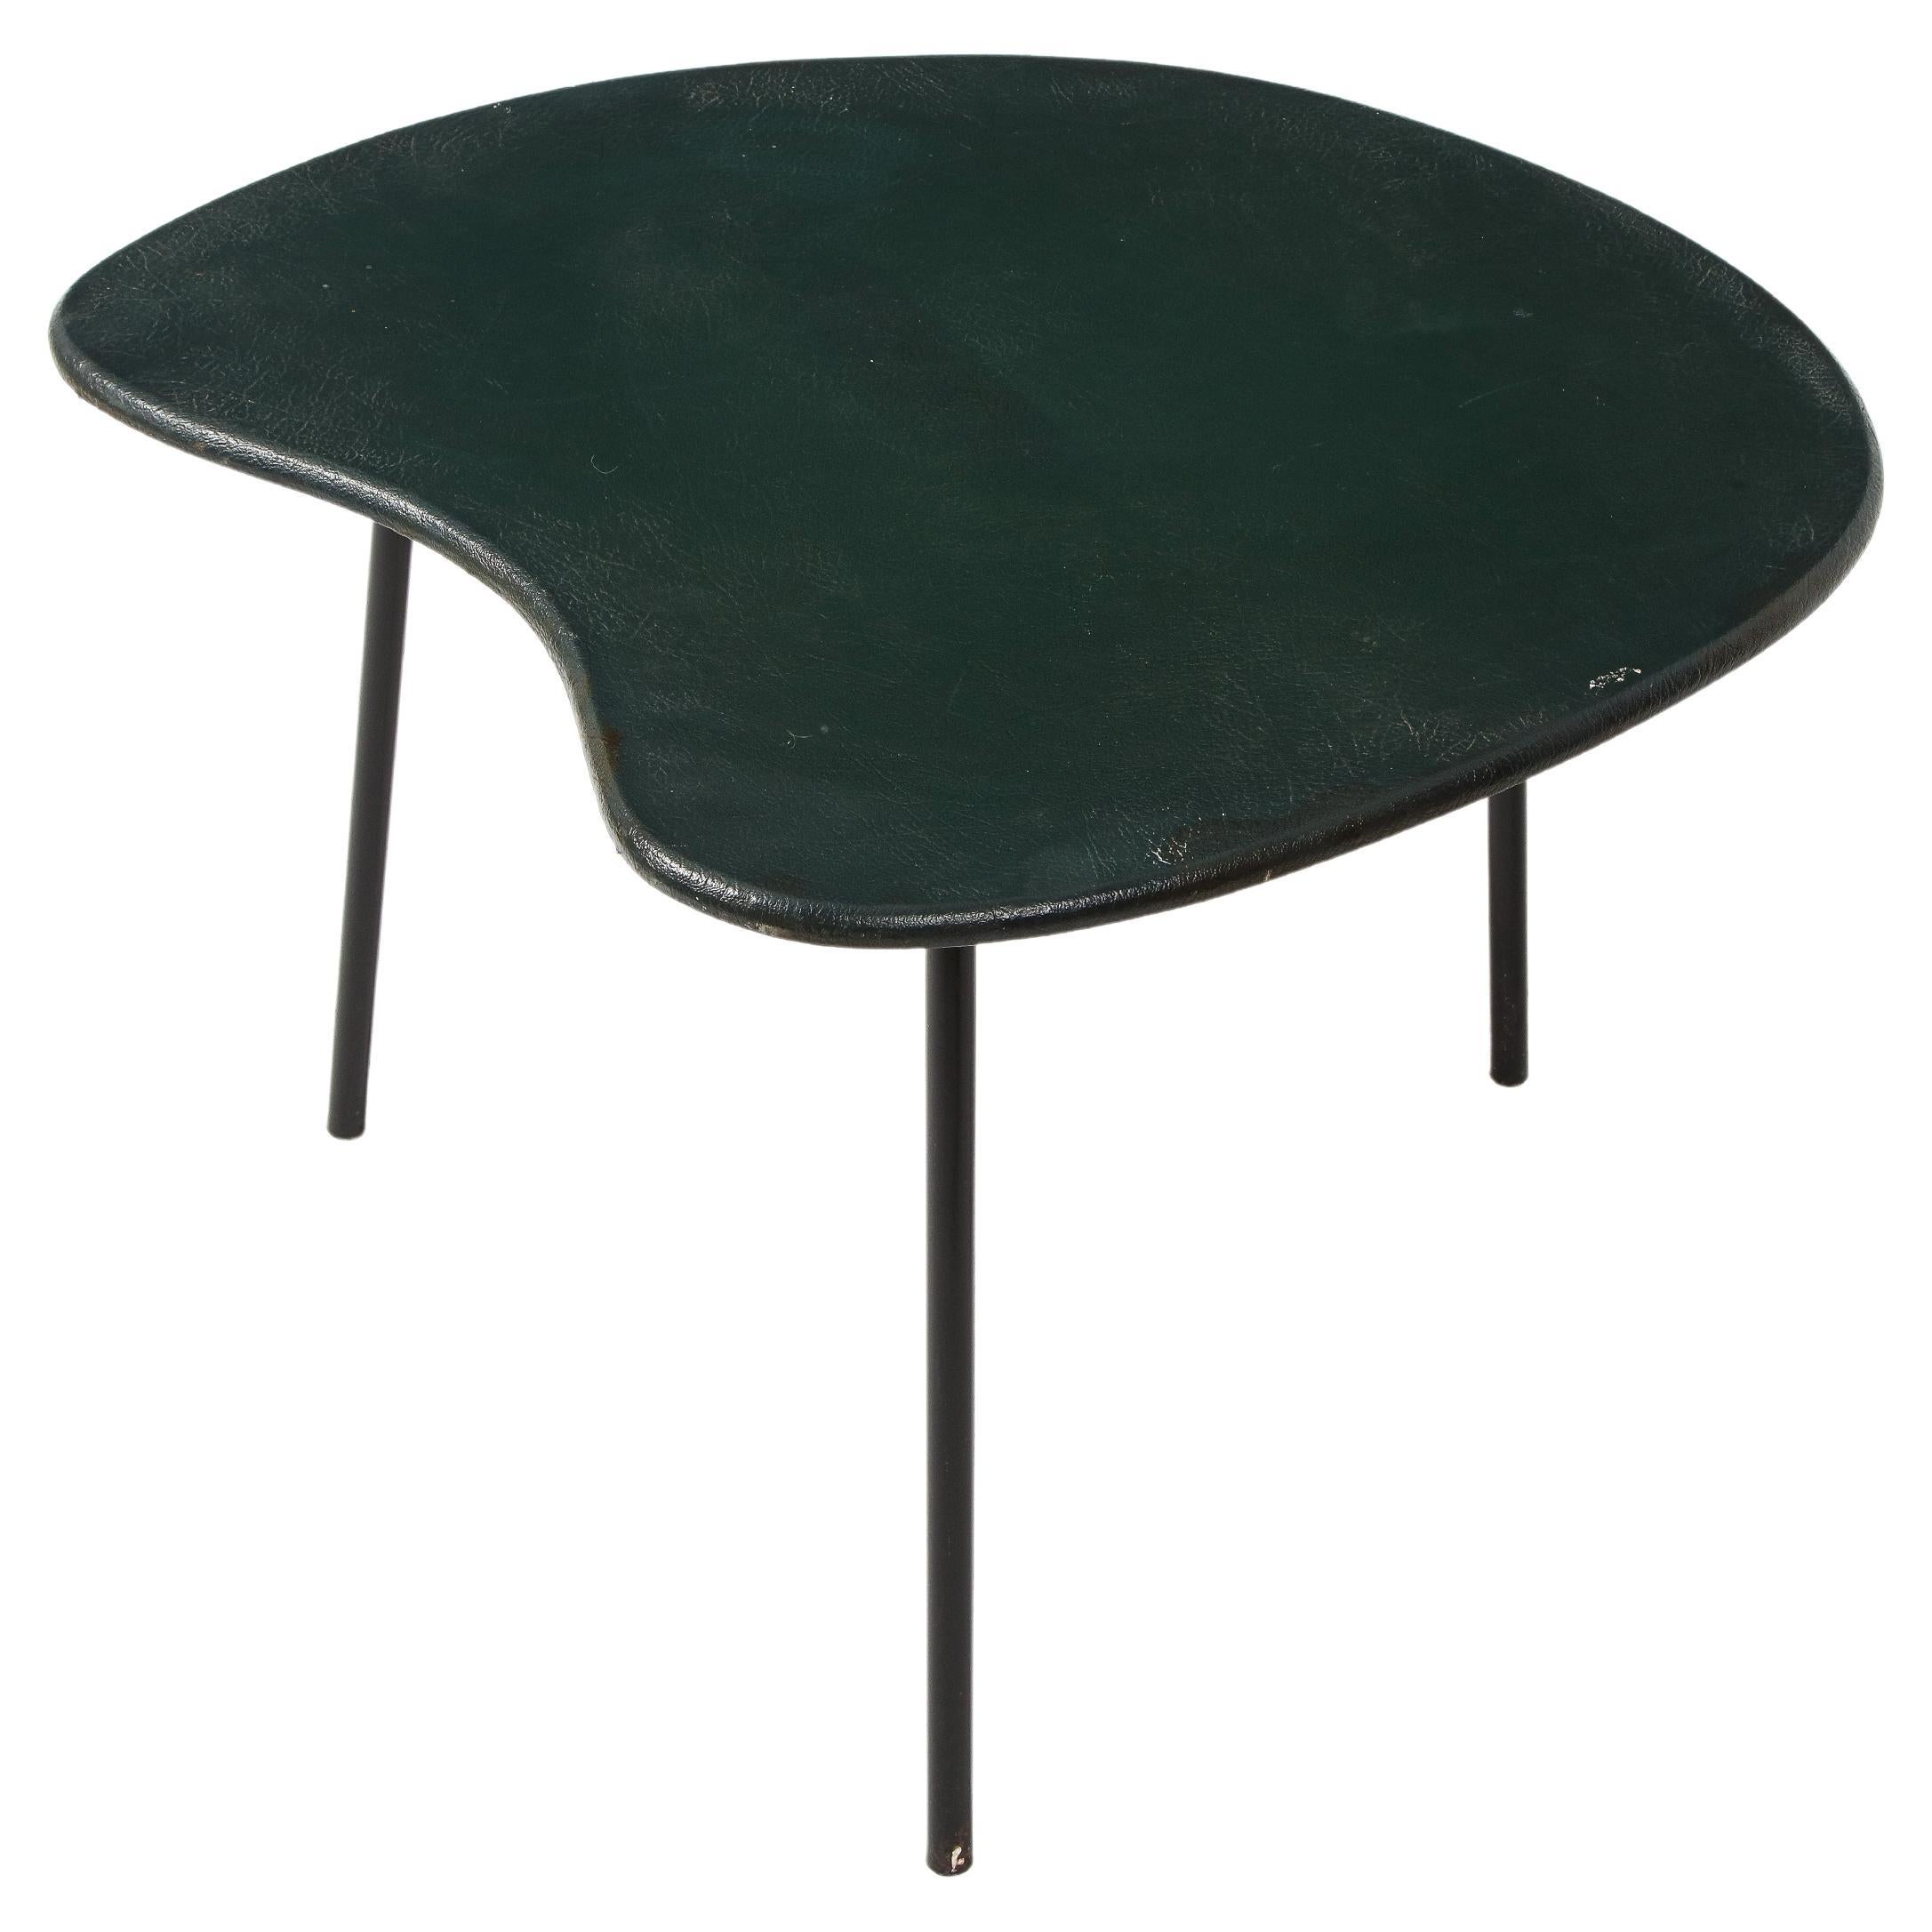 A freeform table reminiscent of the work of Jacques Hitier.